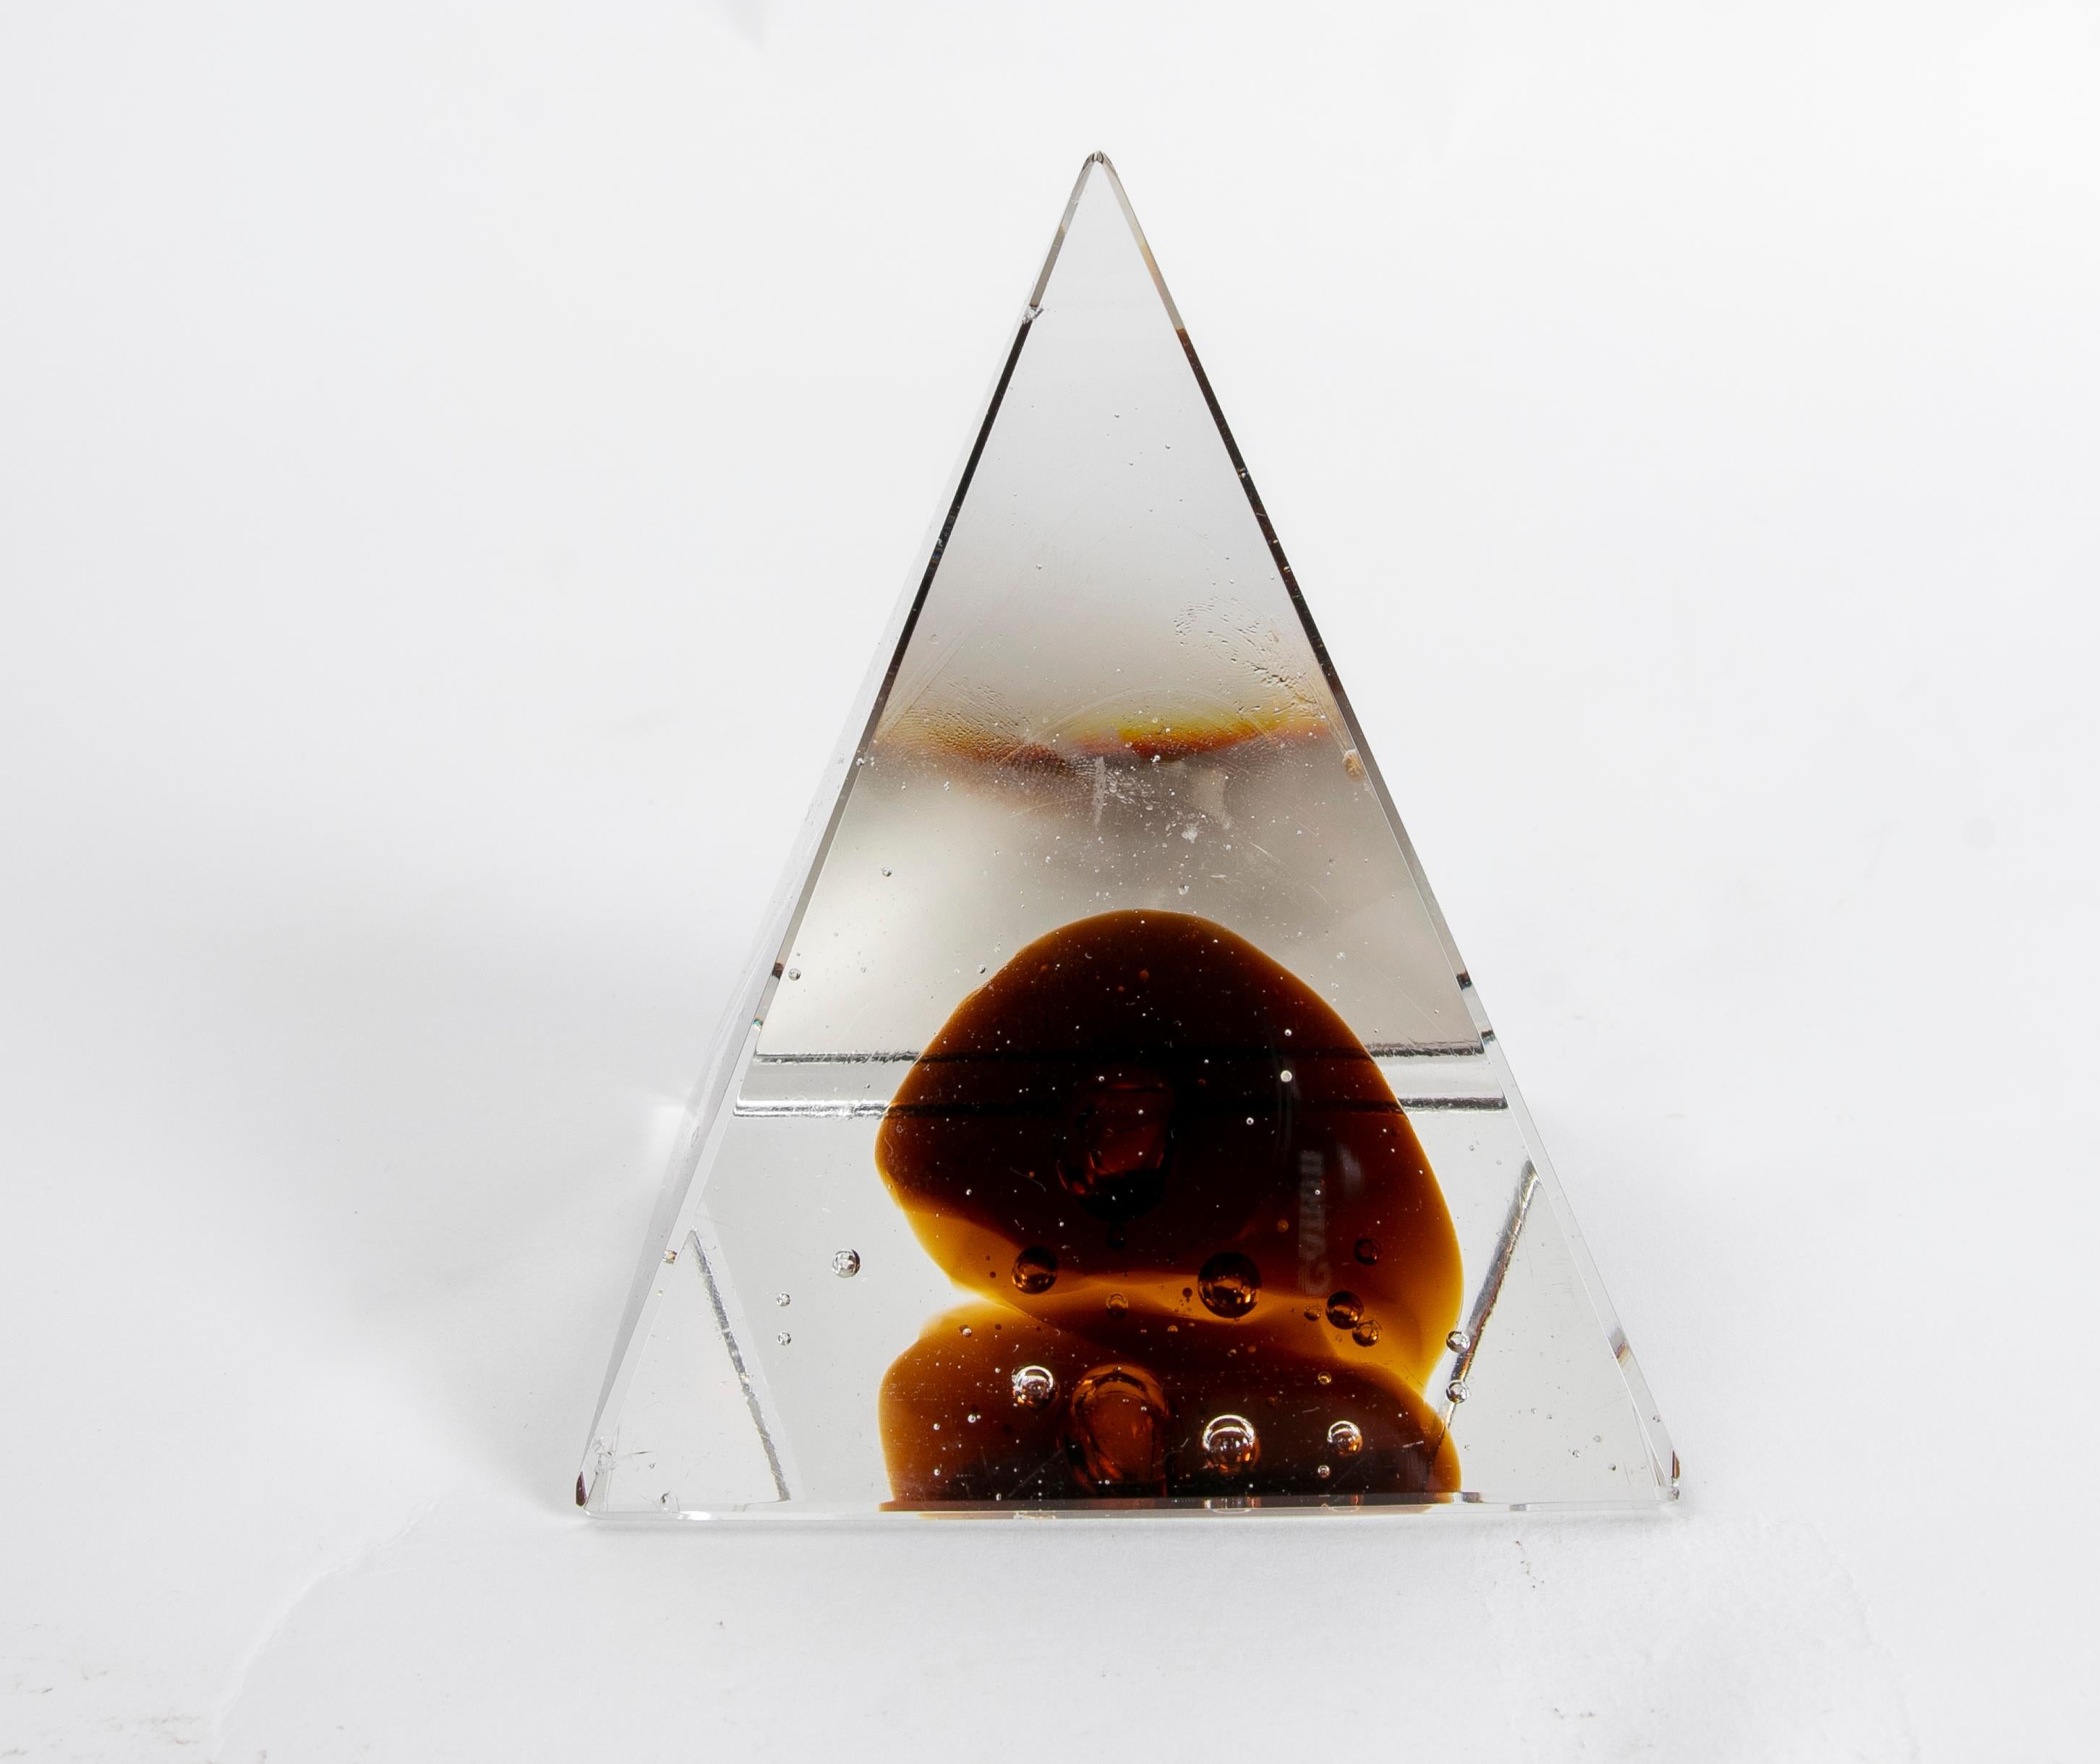 Pyramid-shaped glass paperweight.